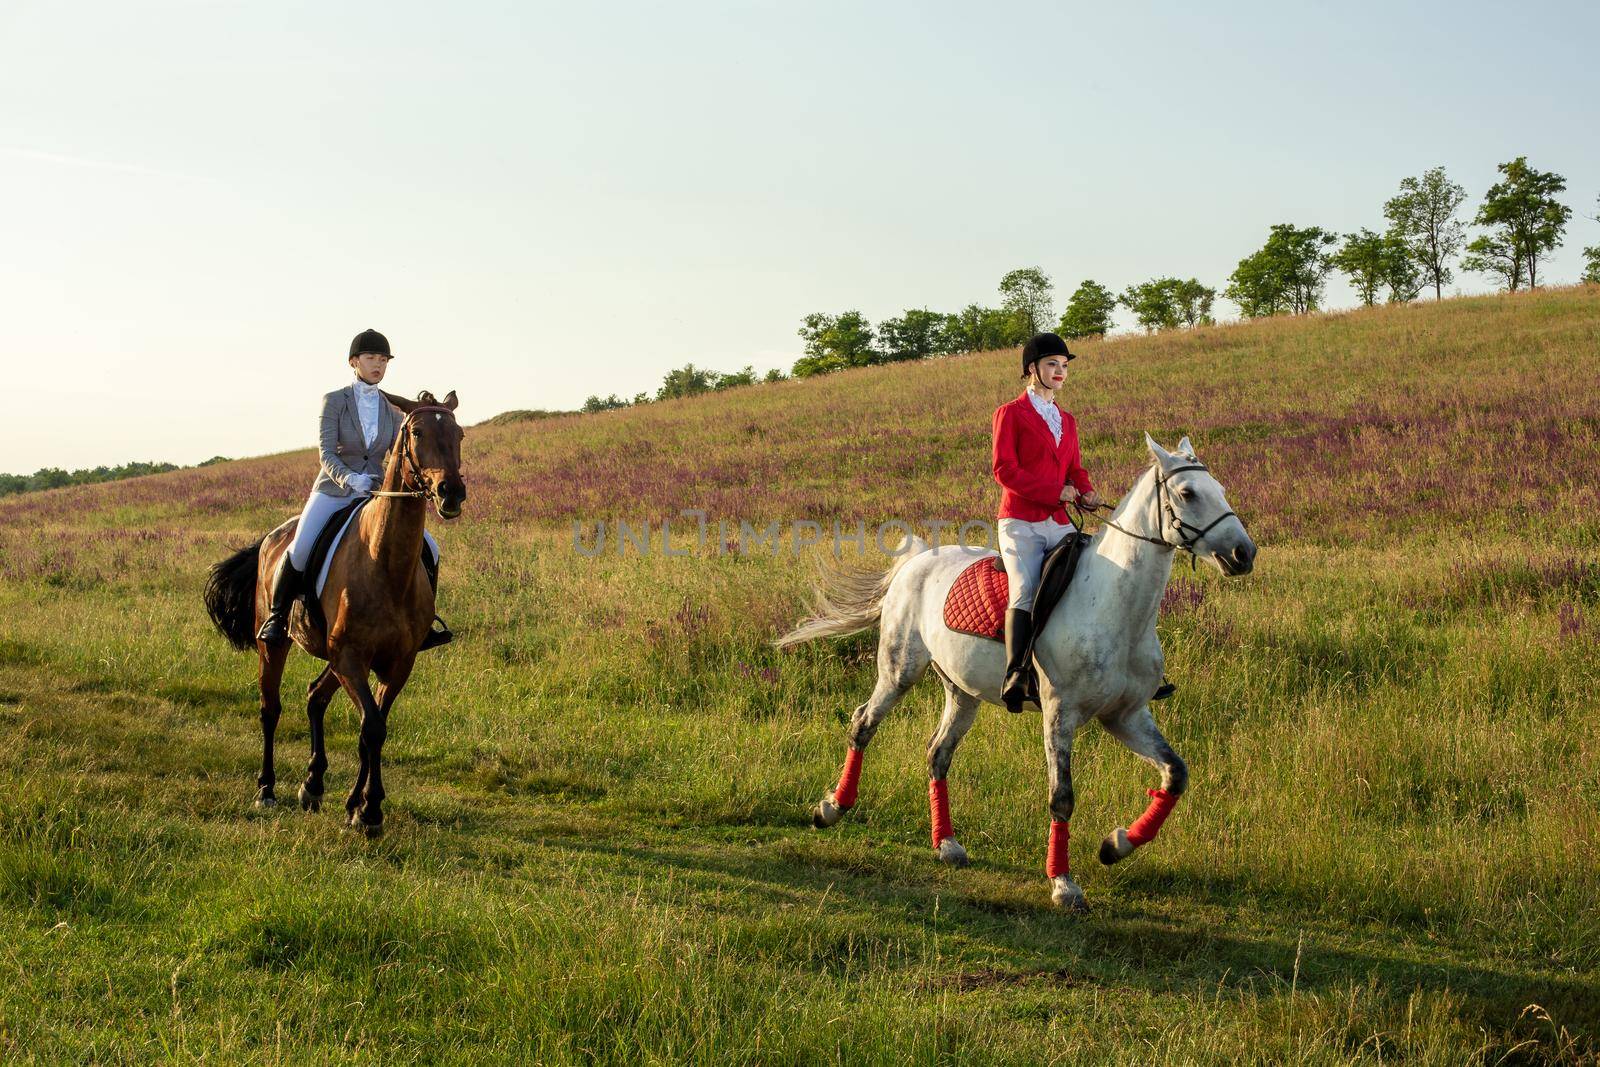 Horseback riders. Two attractive women ride horses on a green meadow. Horse riding. Horse racing. Rider on a horse.